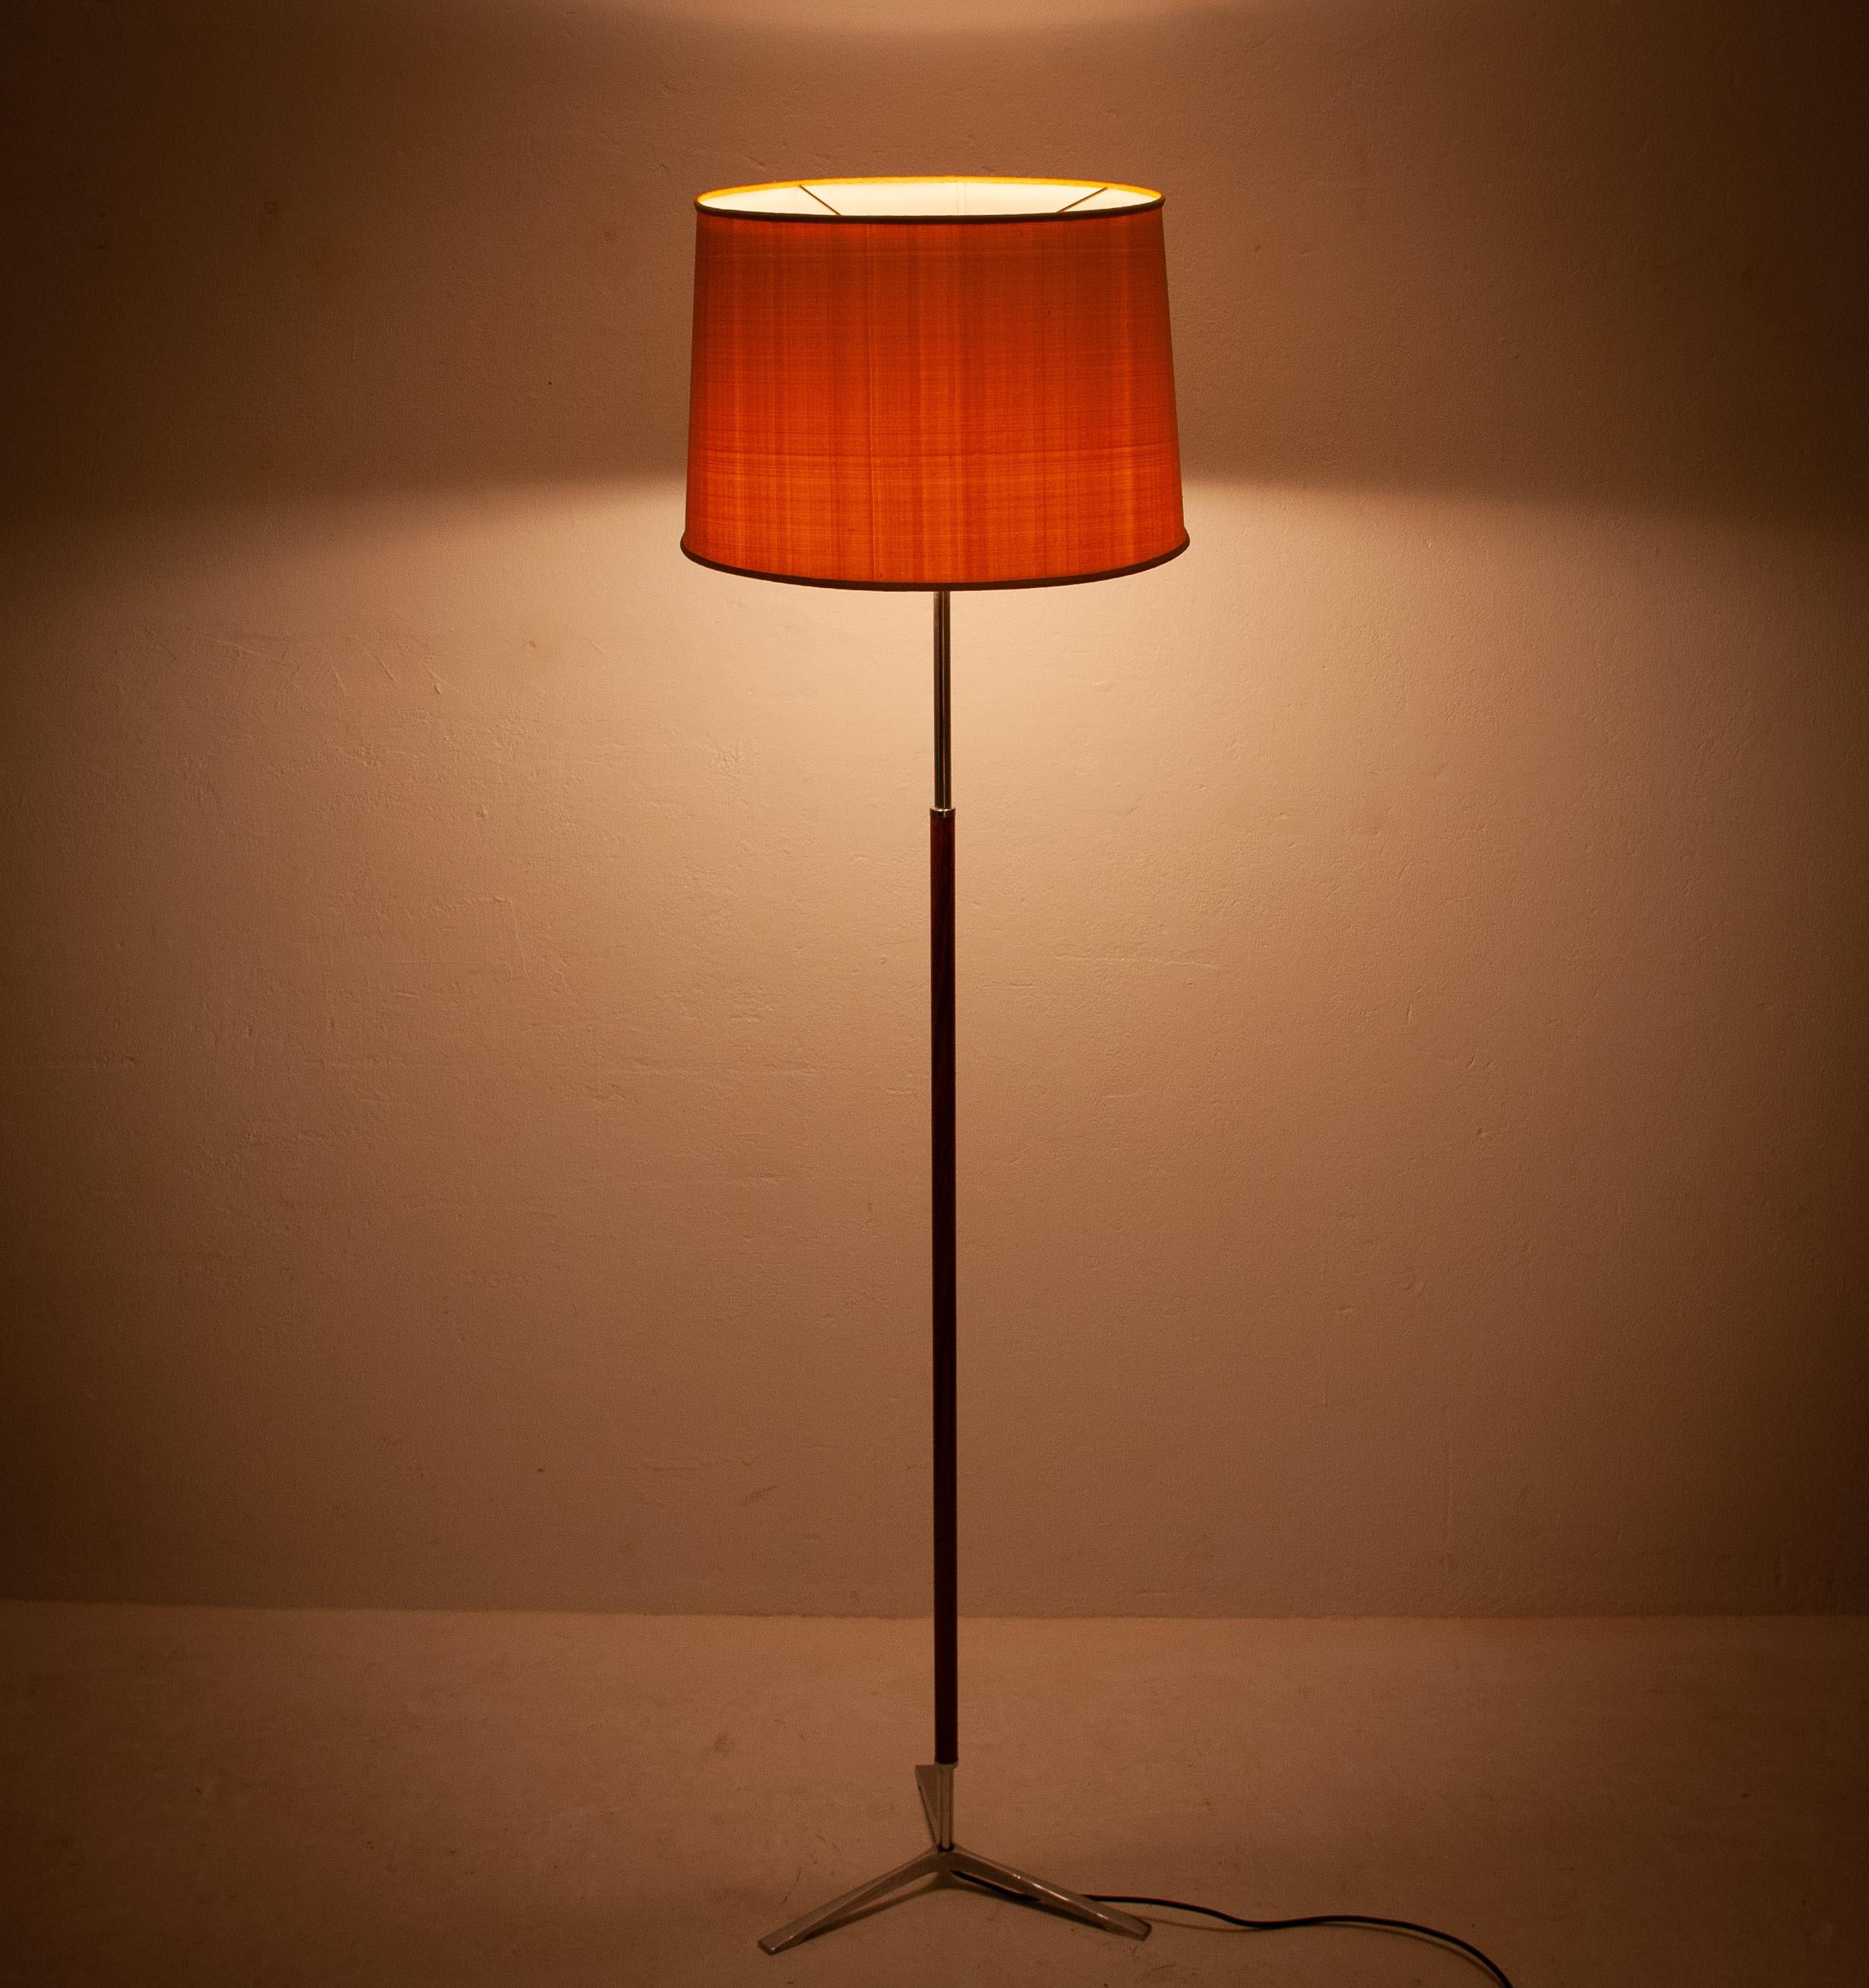 Nice teak and chrome floor lamp. Very nice design, including a golden colored lampshade.
Very good condition.